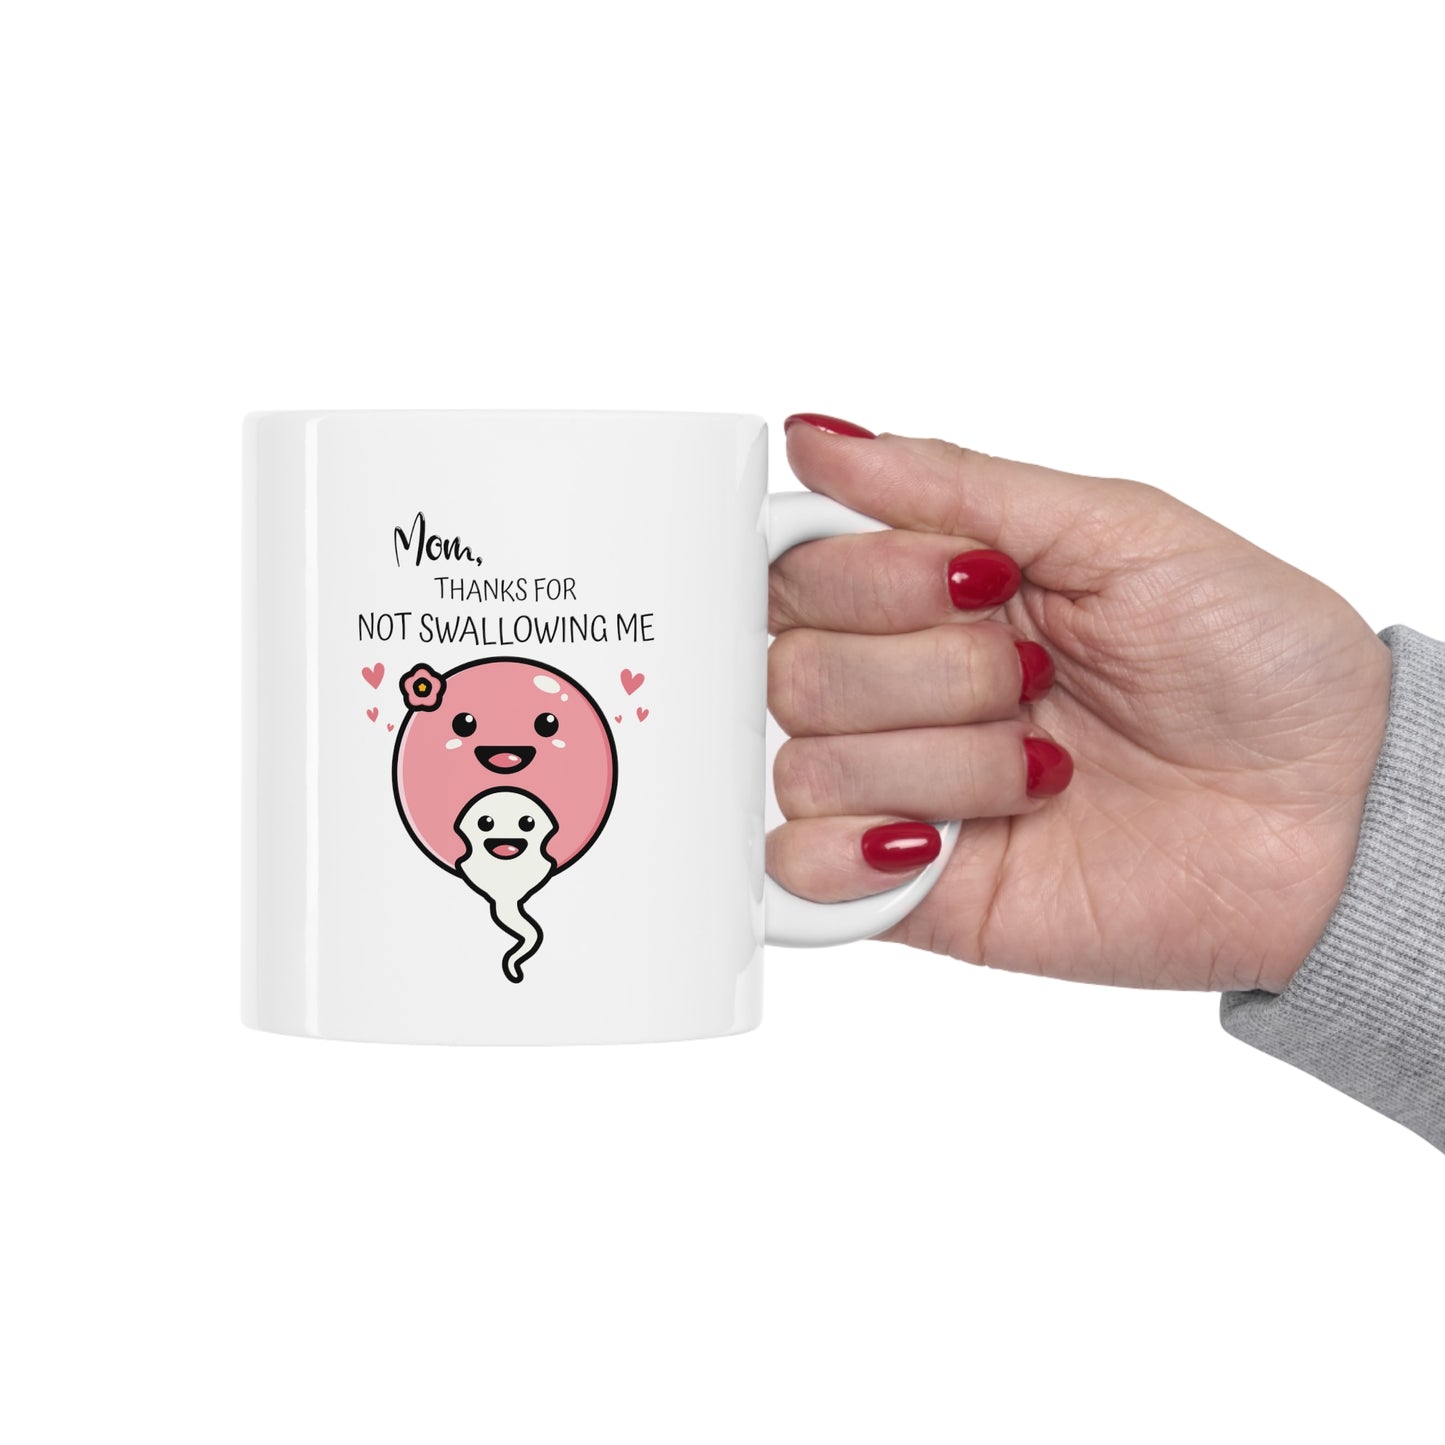 "Mom, Thanks For Not Swallowing Me" Coffee Mug - Weave Got Gifts - Unique Gifts You Won’t Find Anywhere Else!